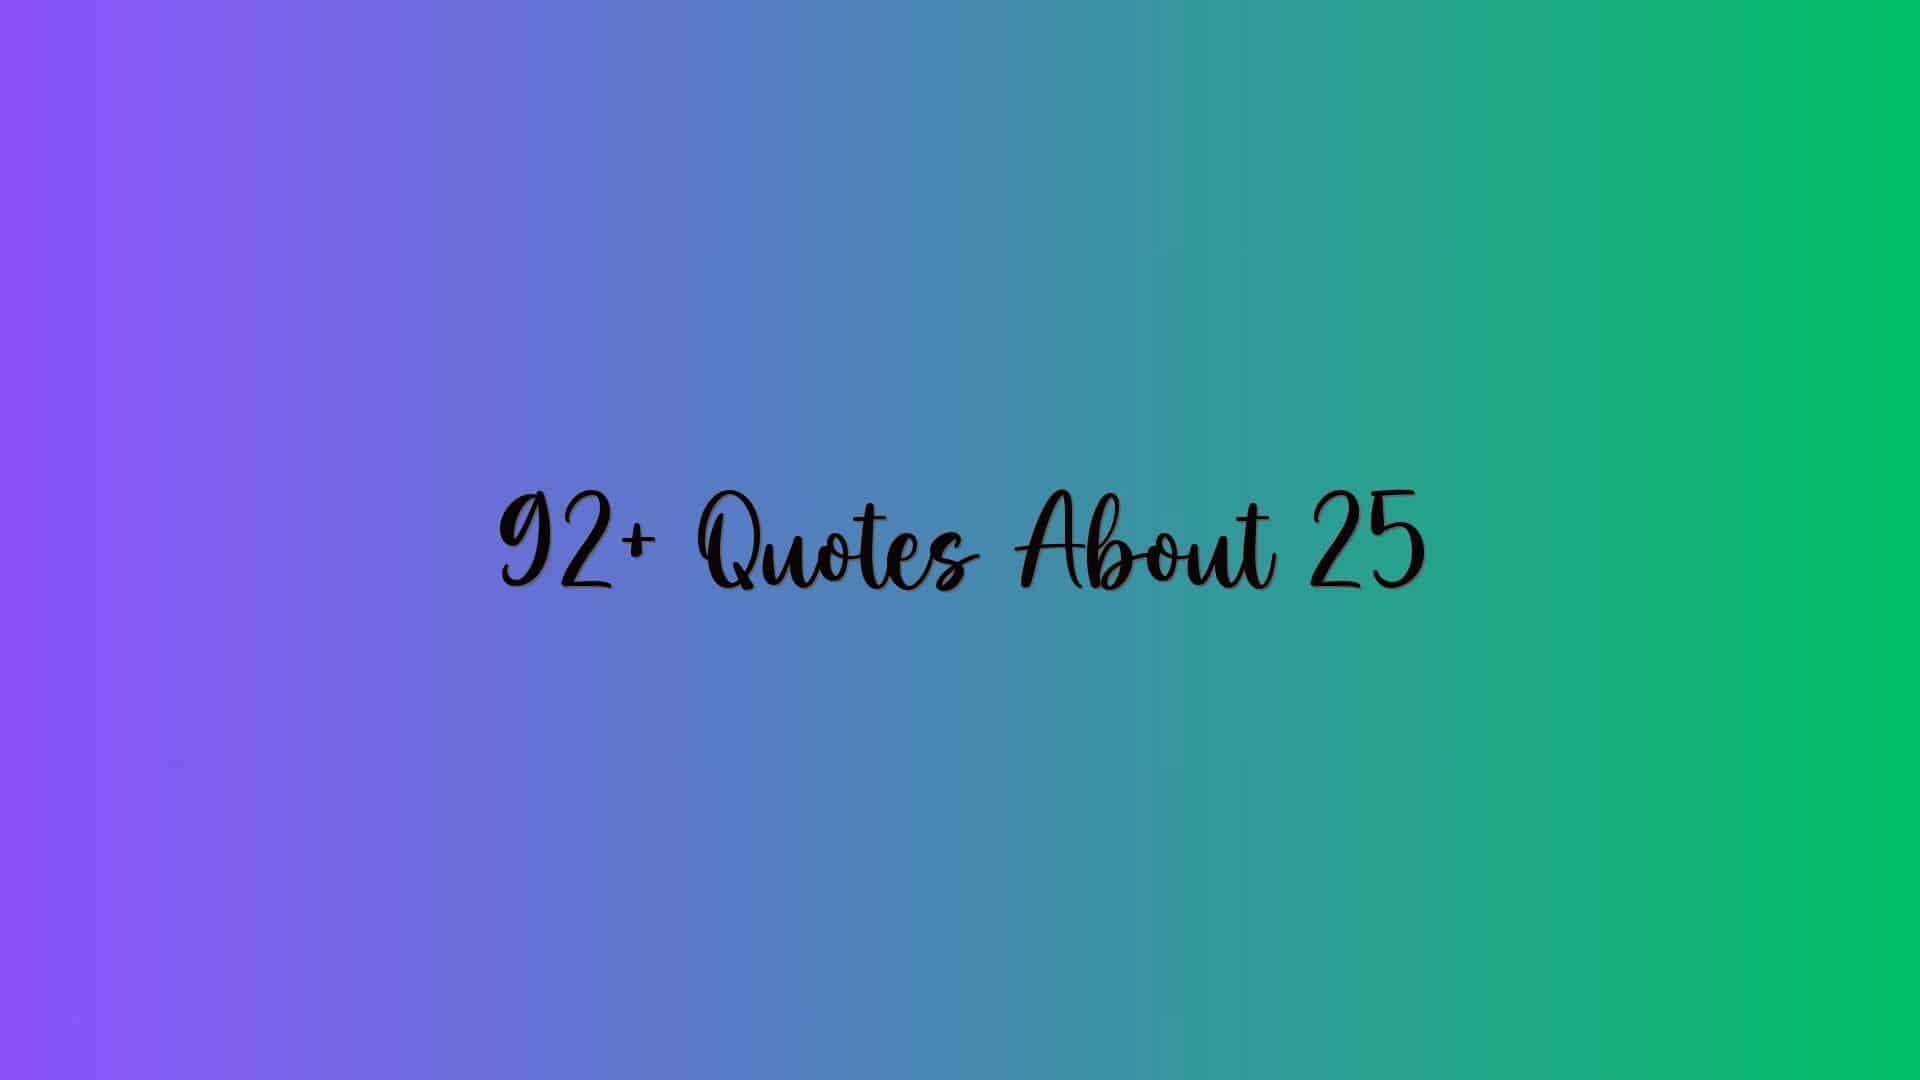 92+ Quotes About 25